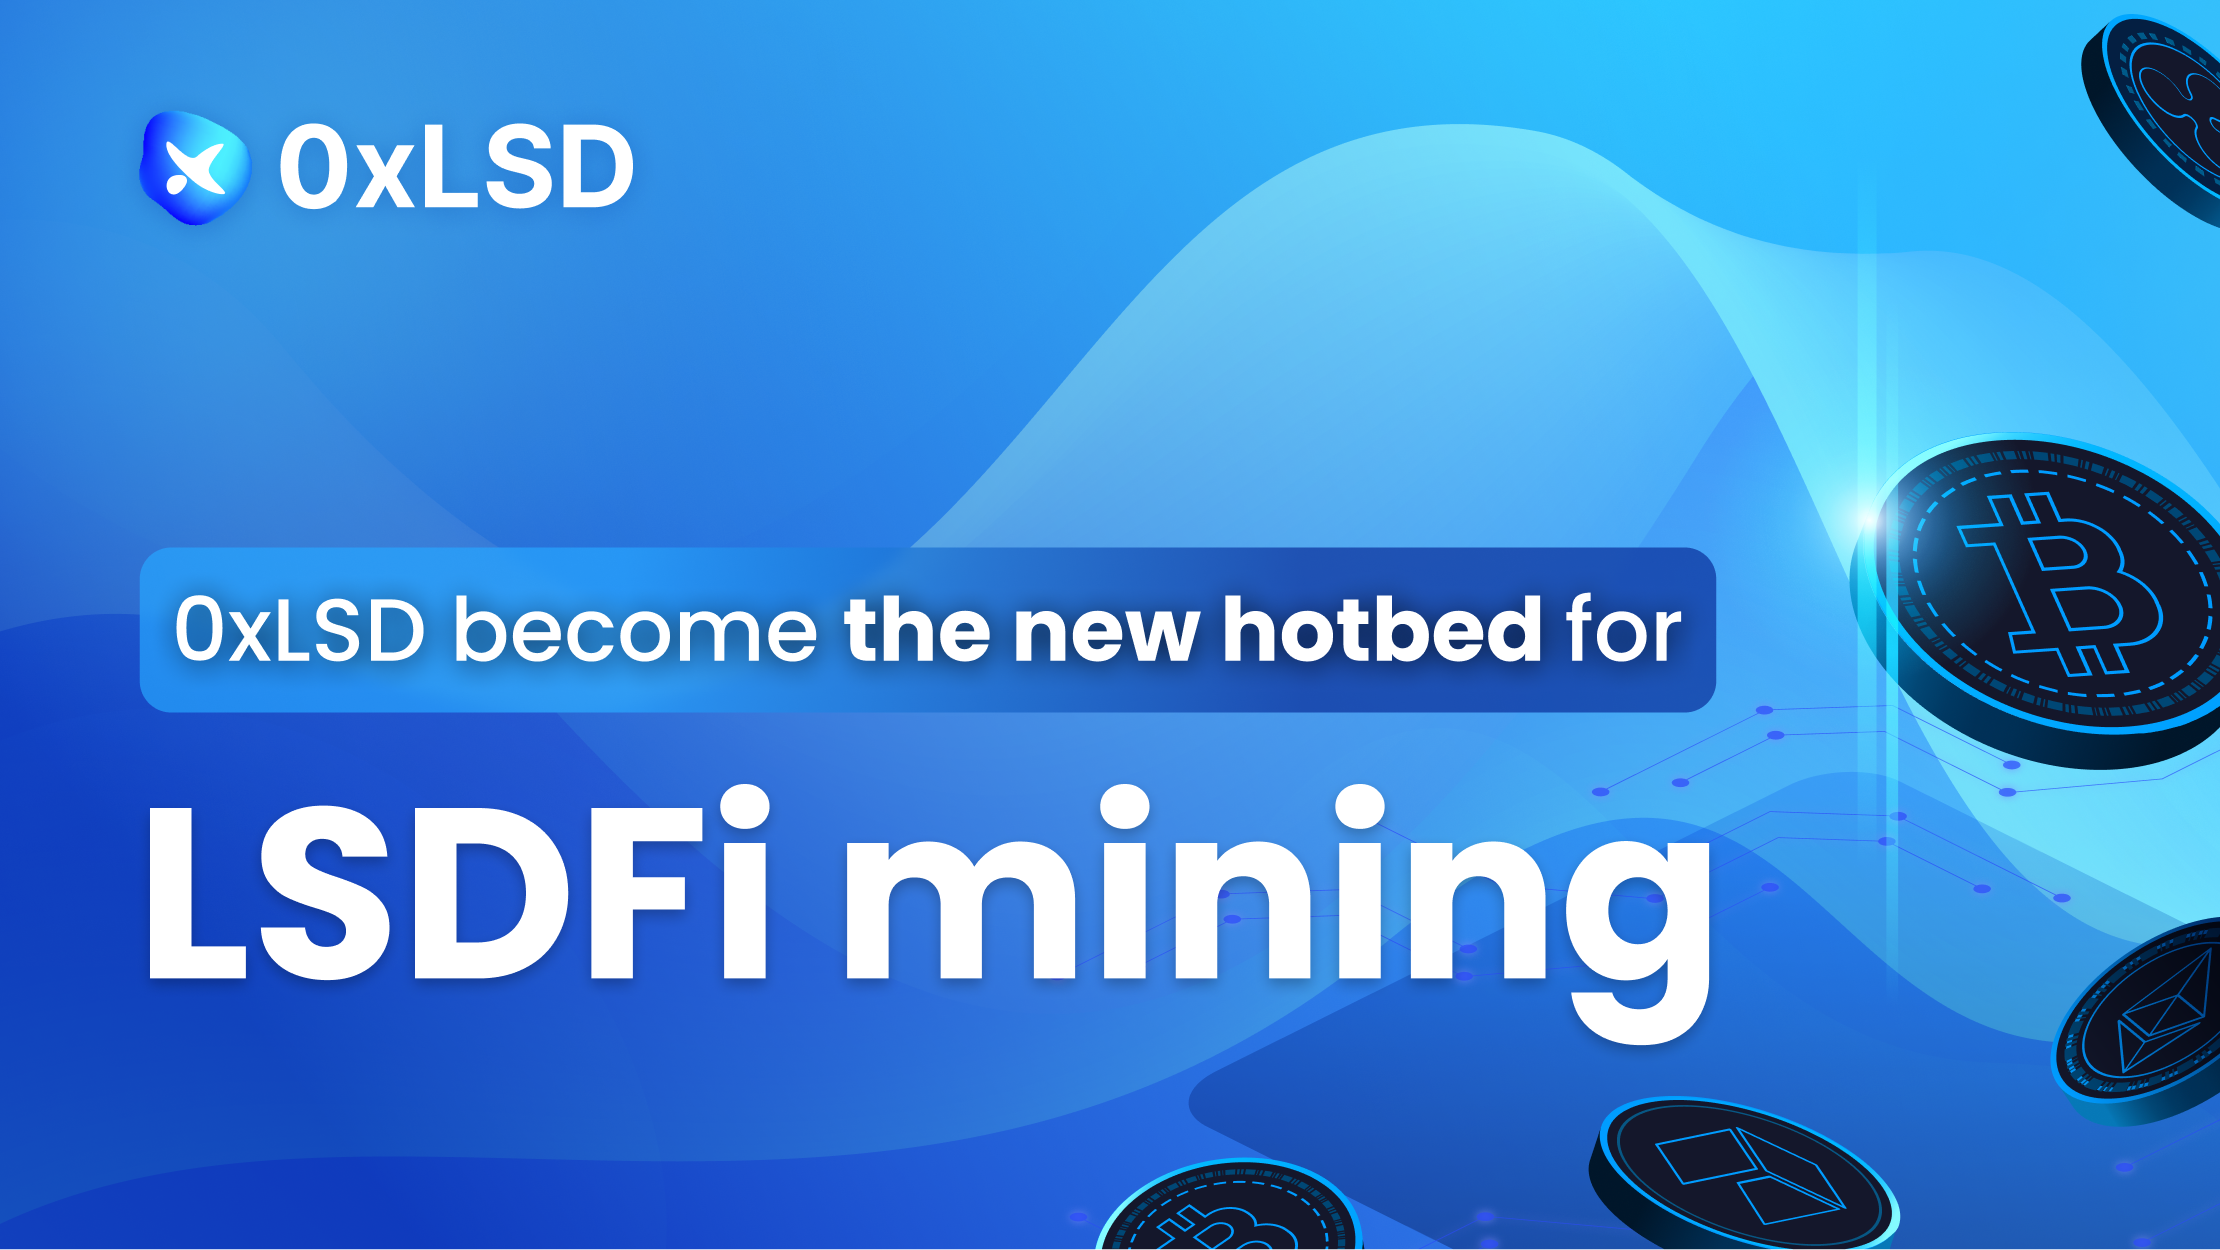 0xLSD becomes the new hotbed for LSDFi mining!